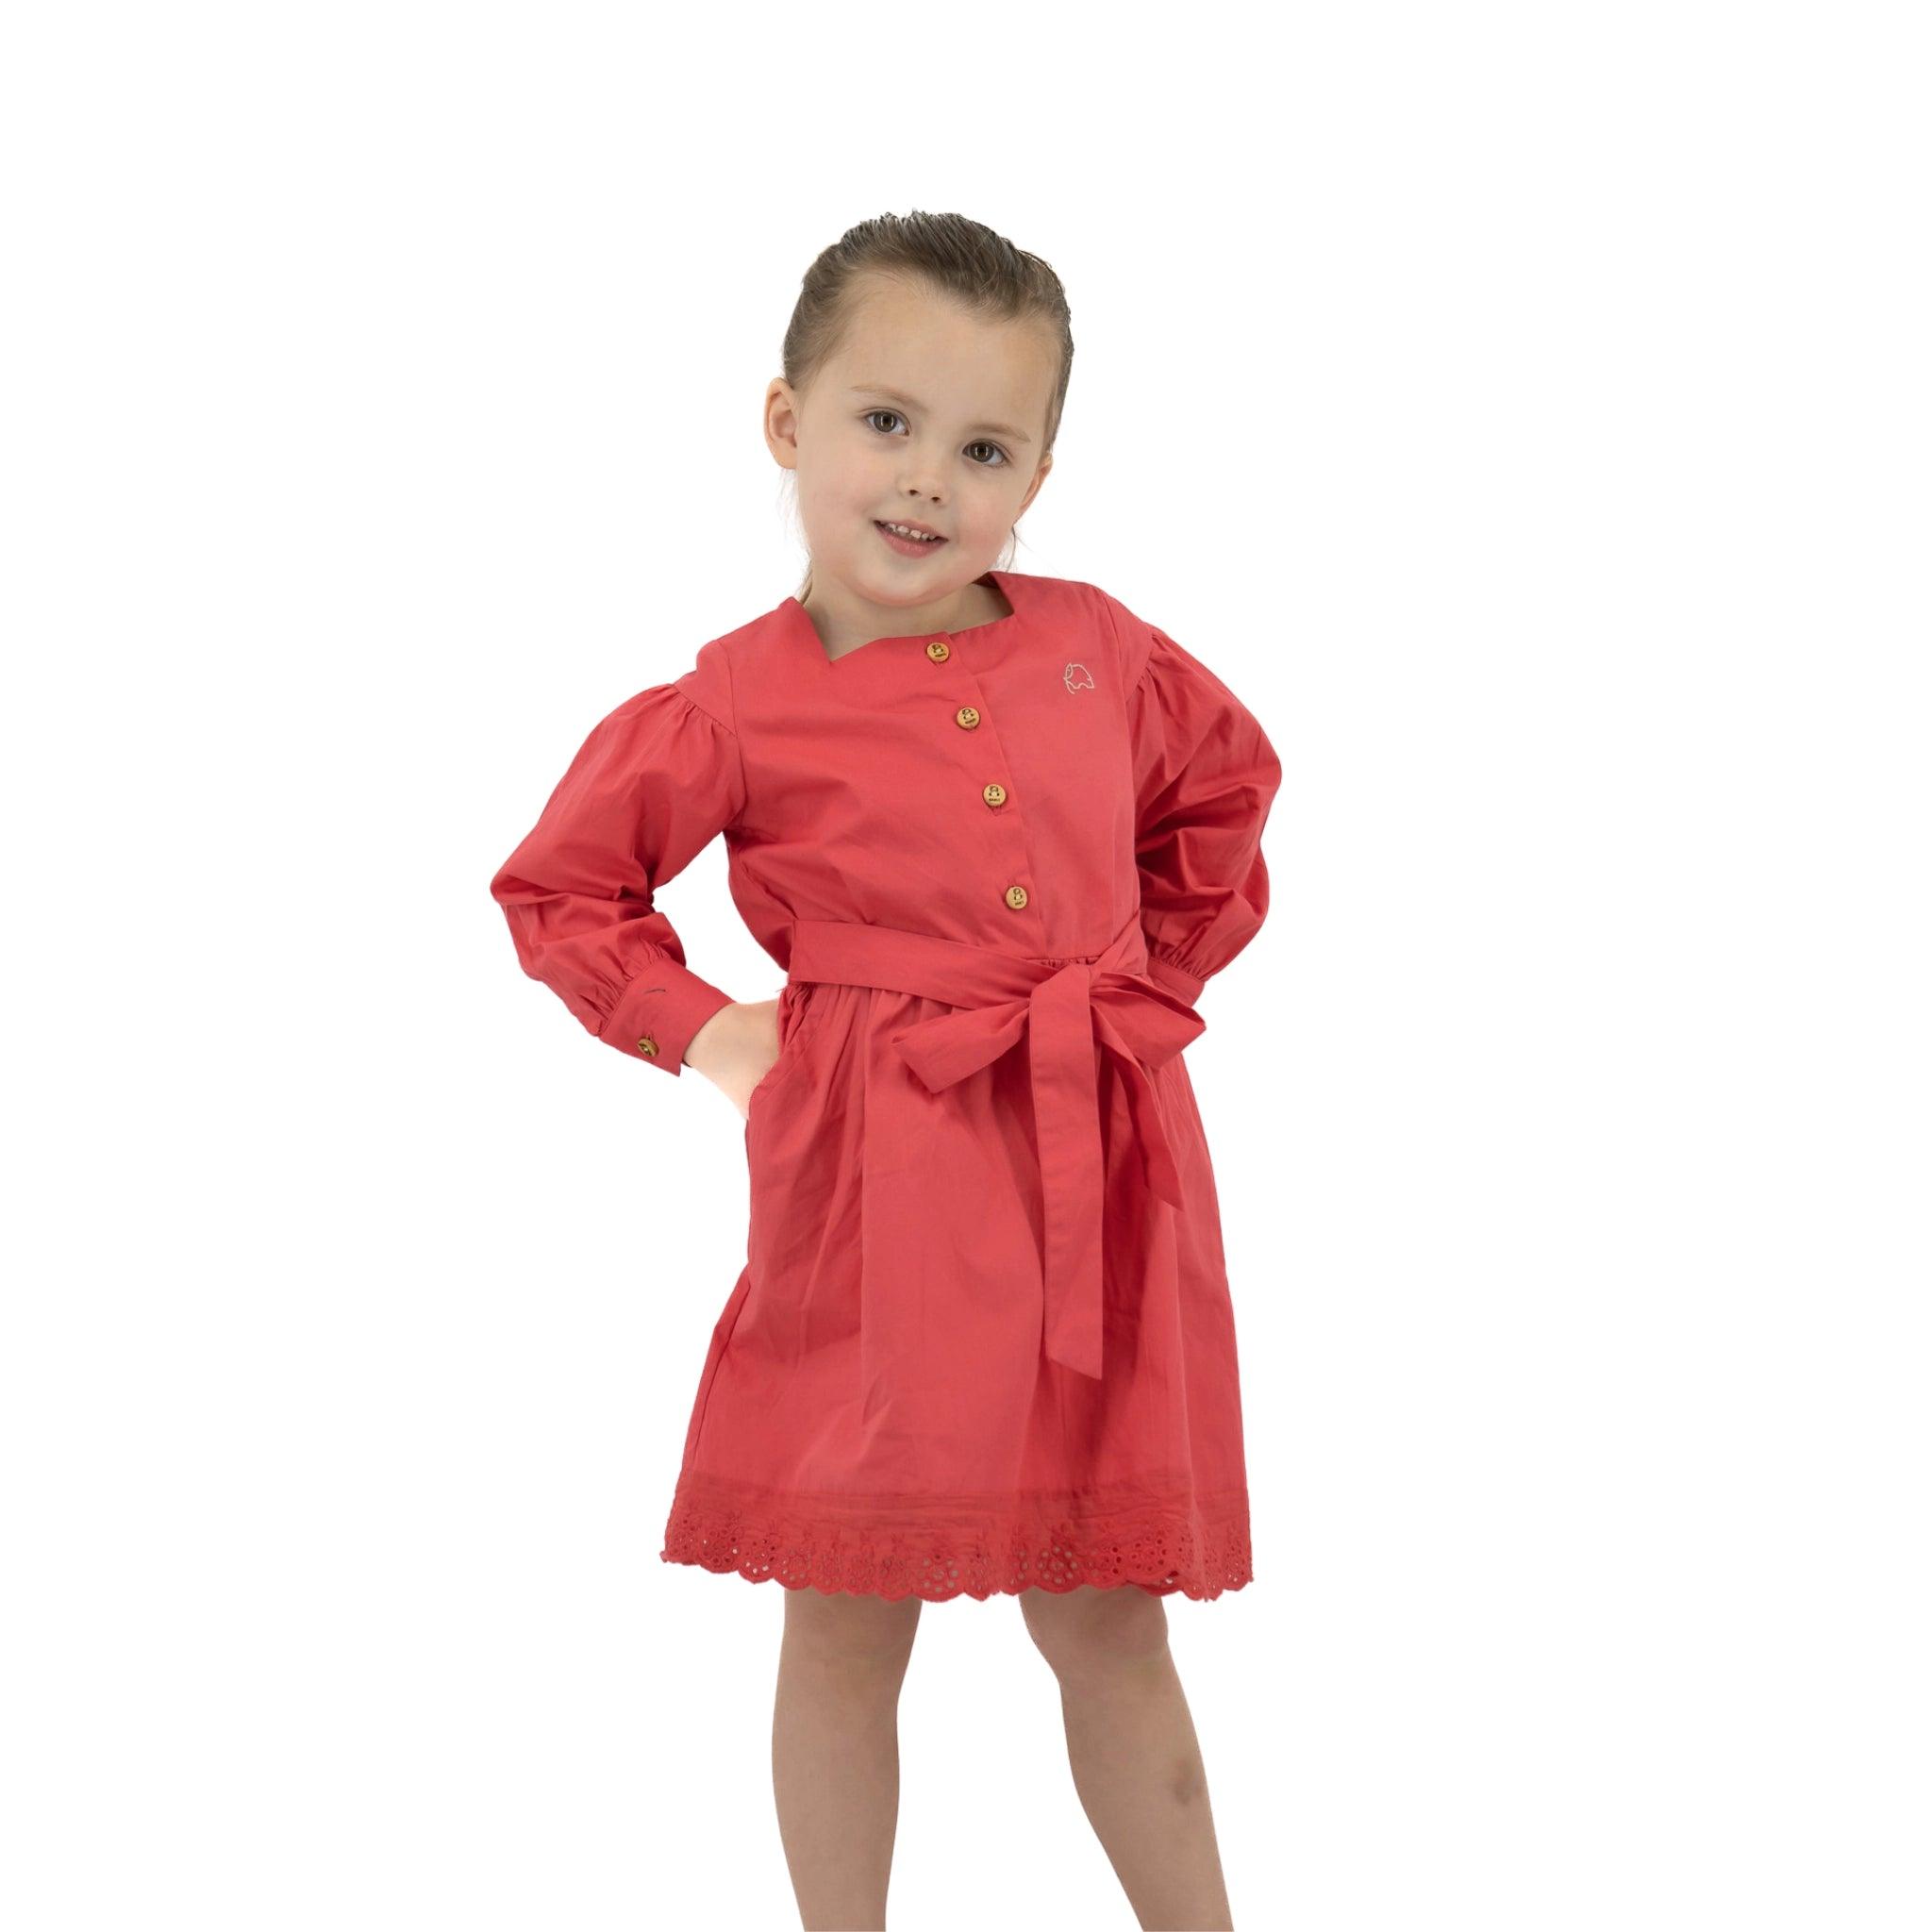 Young girl in a Karee red long puff sleeve cotton dress posing with hands on hips, standing against a white background.